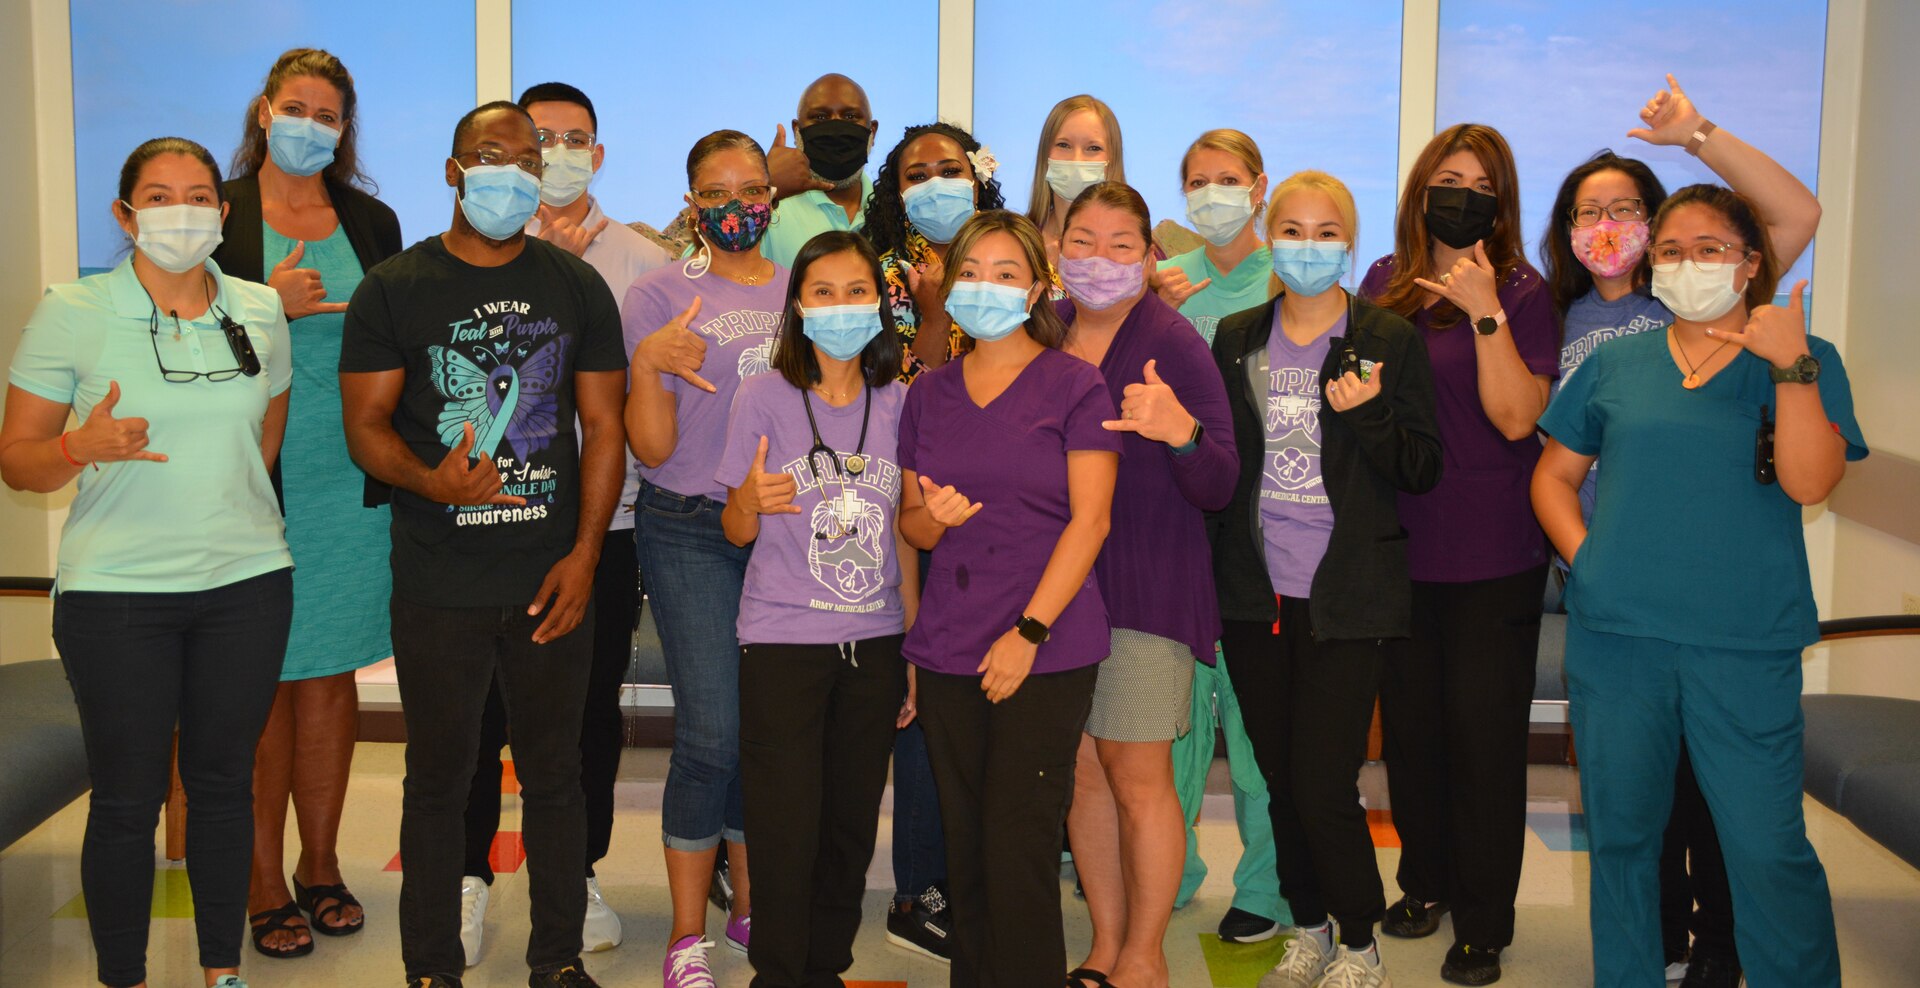 In support of Suicide Awareness month, Tripler Ohana wore the supporting colors of Purple and Teal.